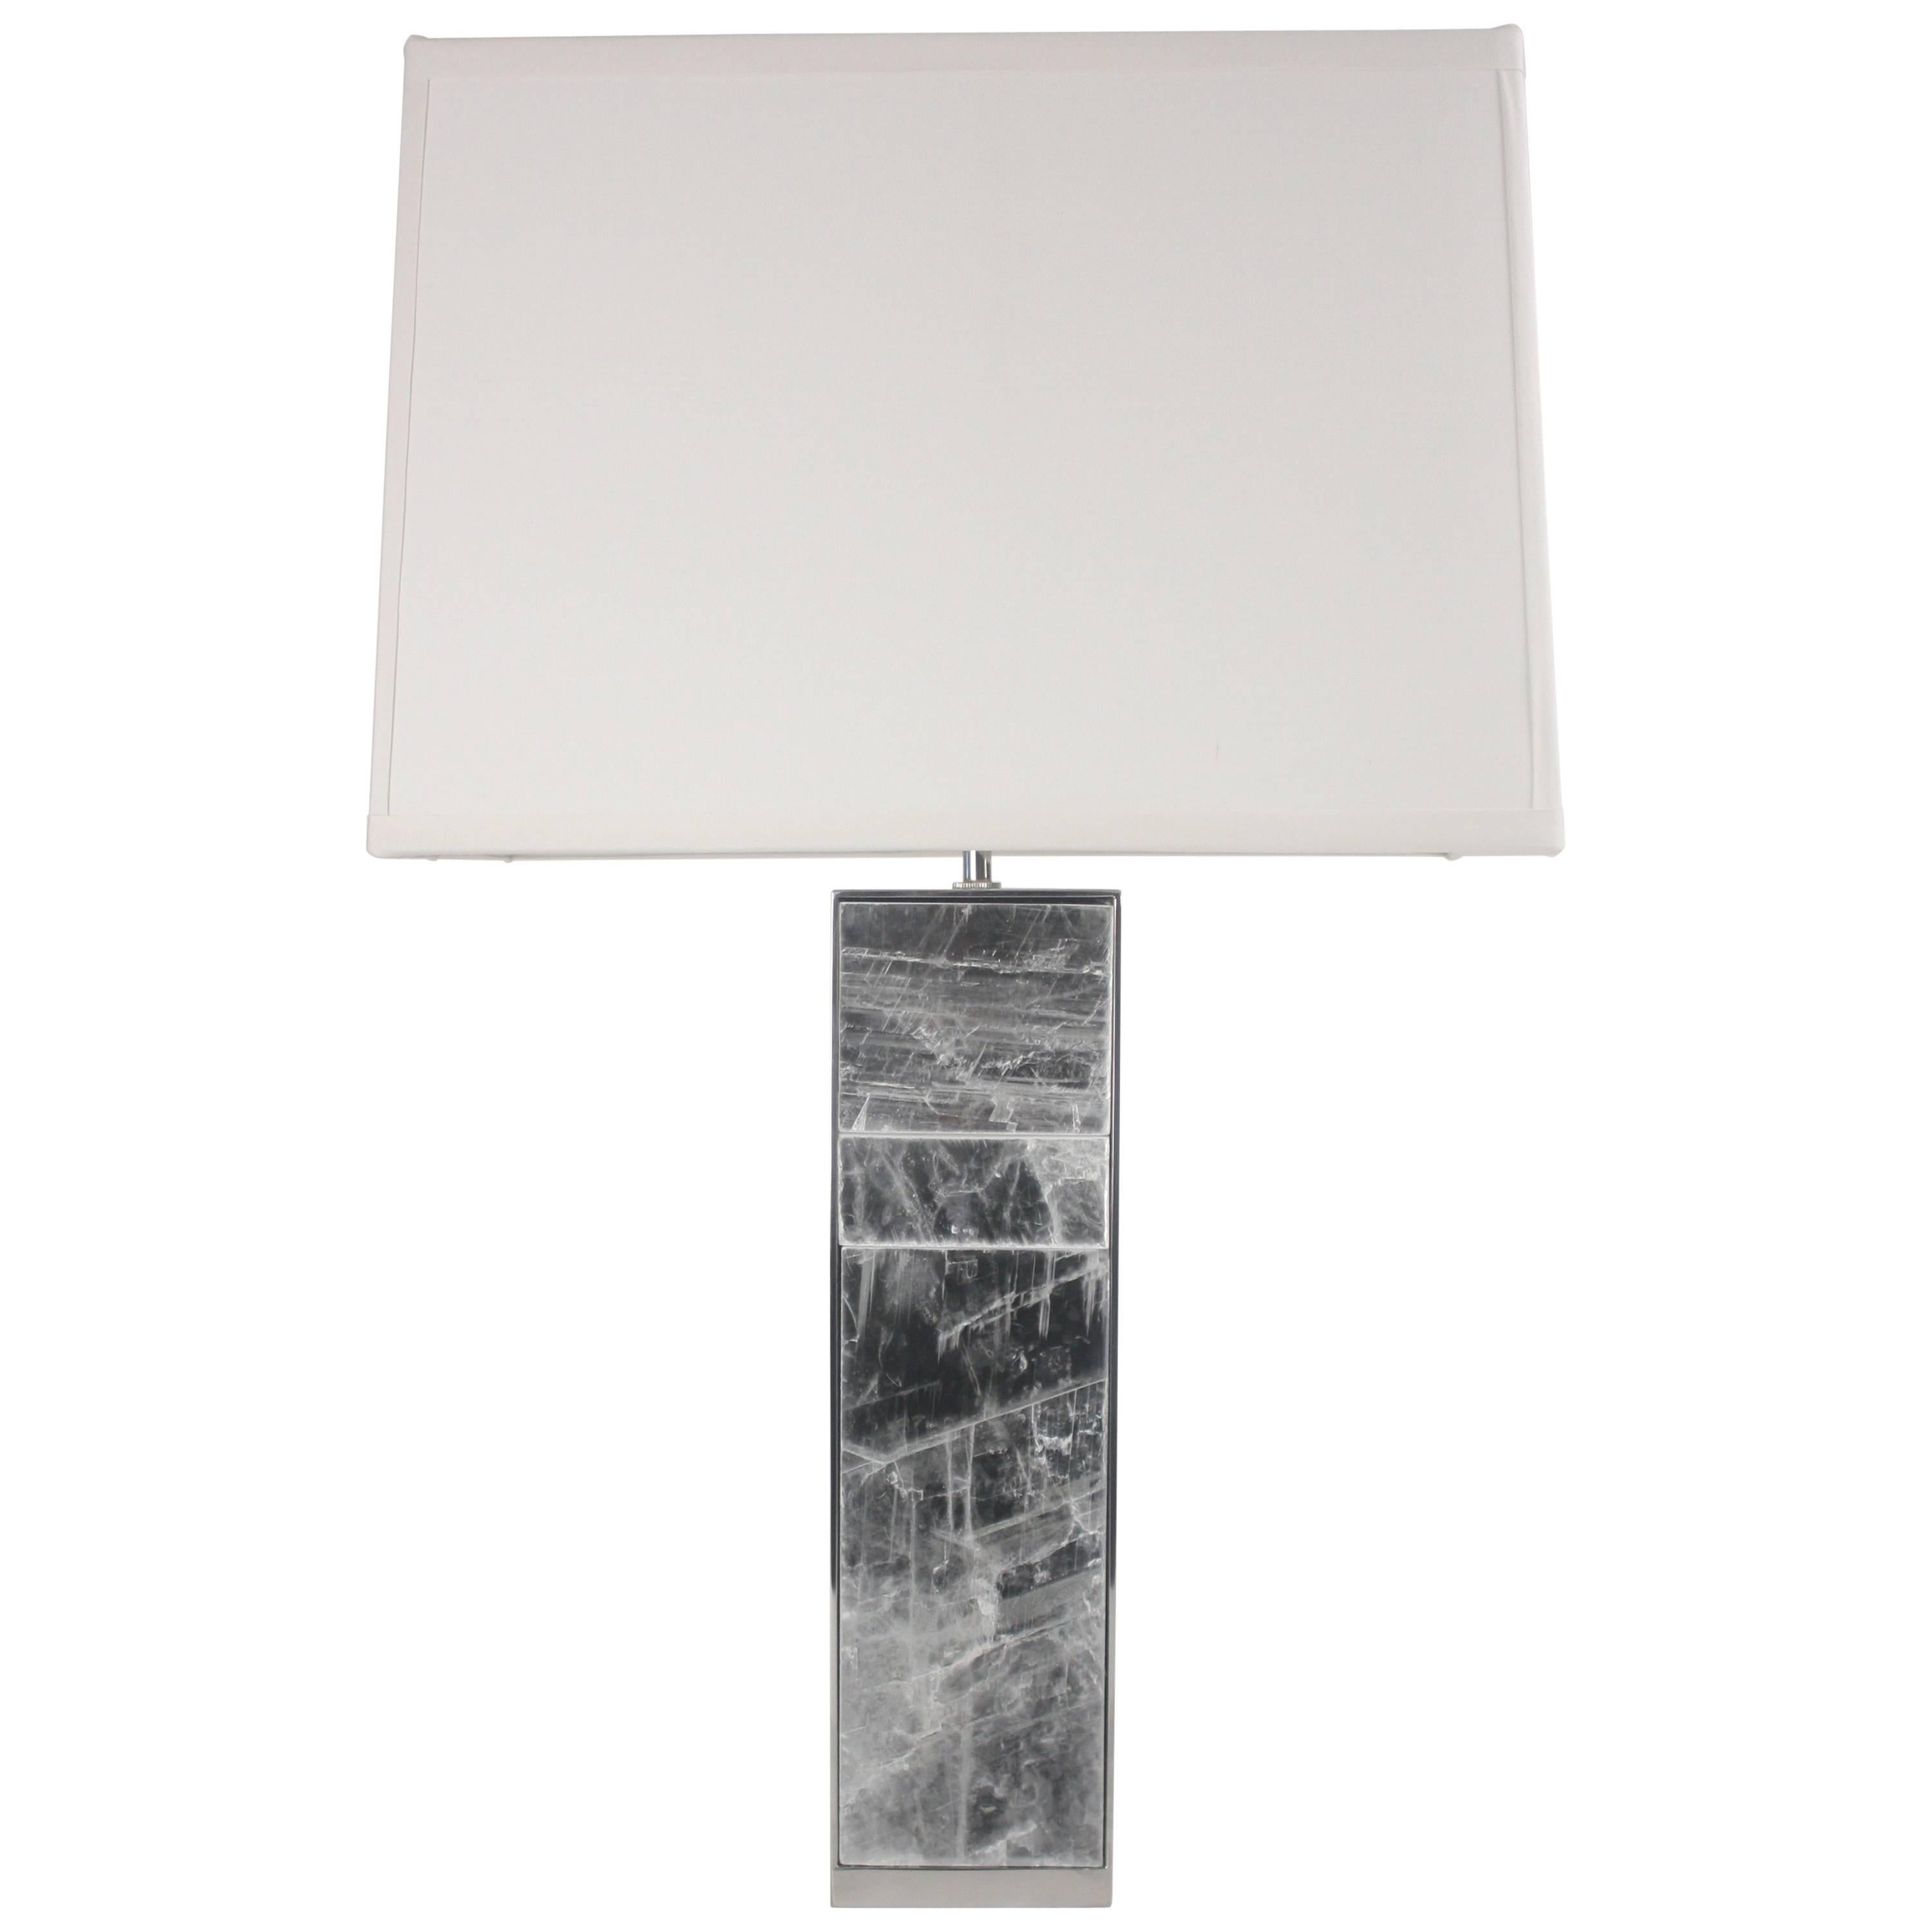 Emily Summers Studio Line Selenite and Stainless Steel Table Lamp For Sale